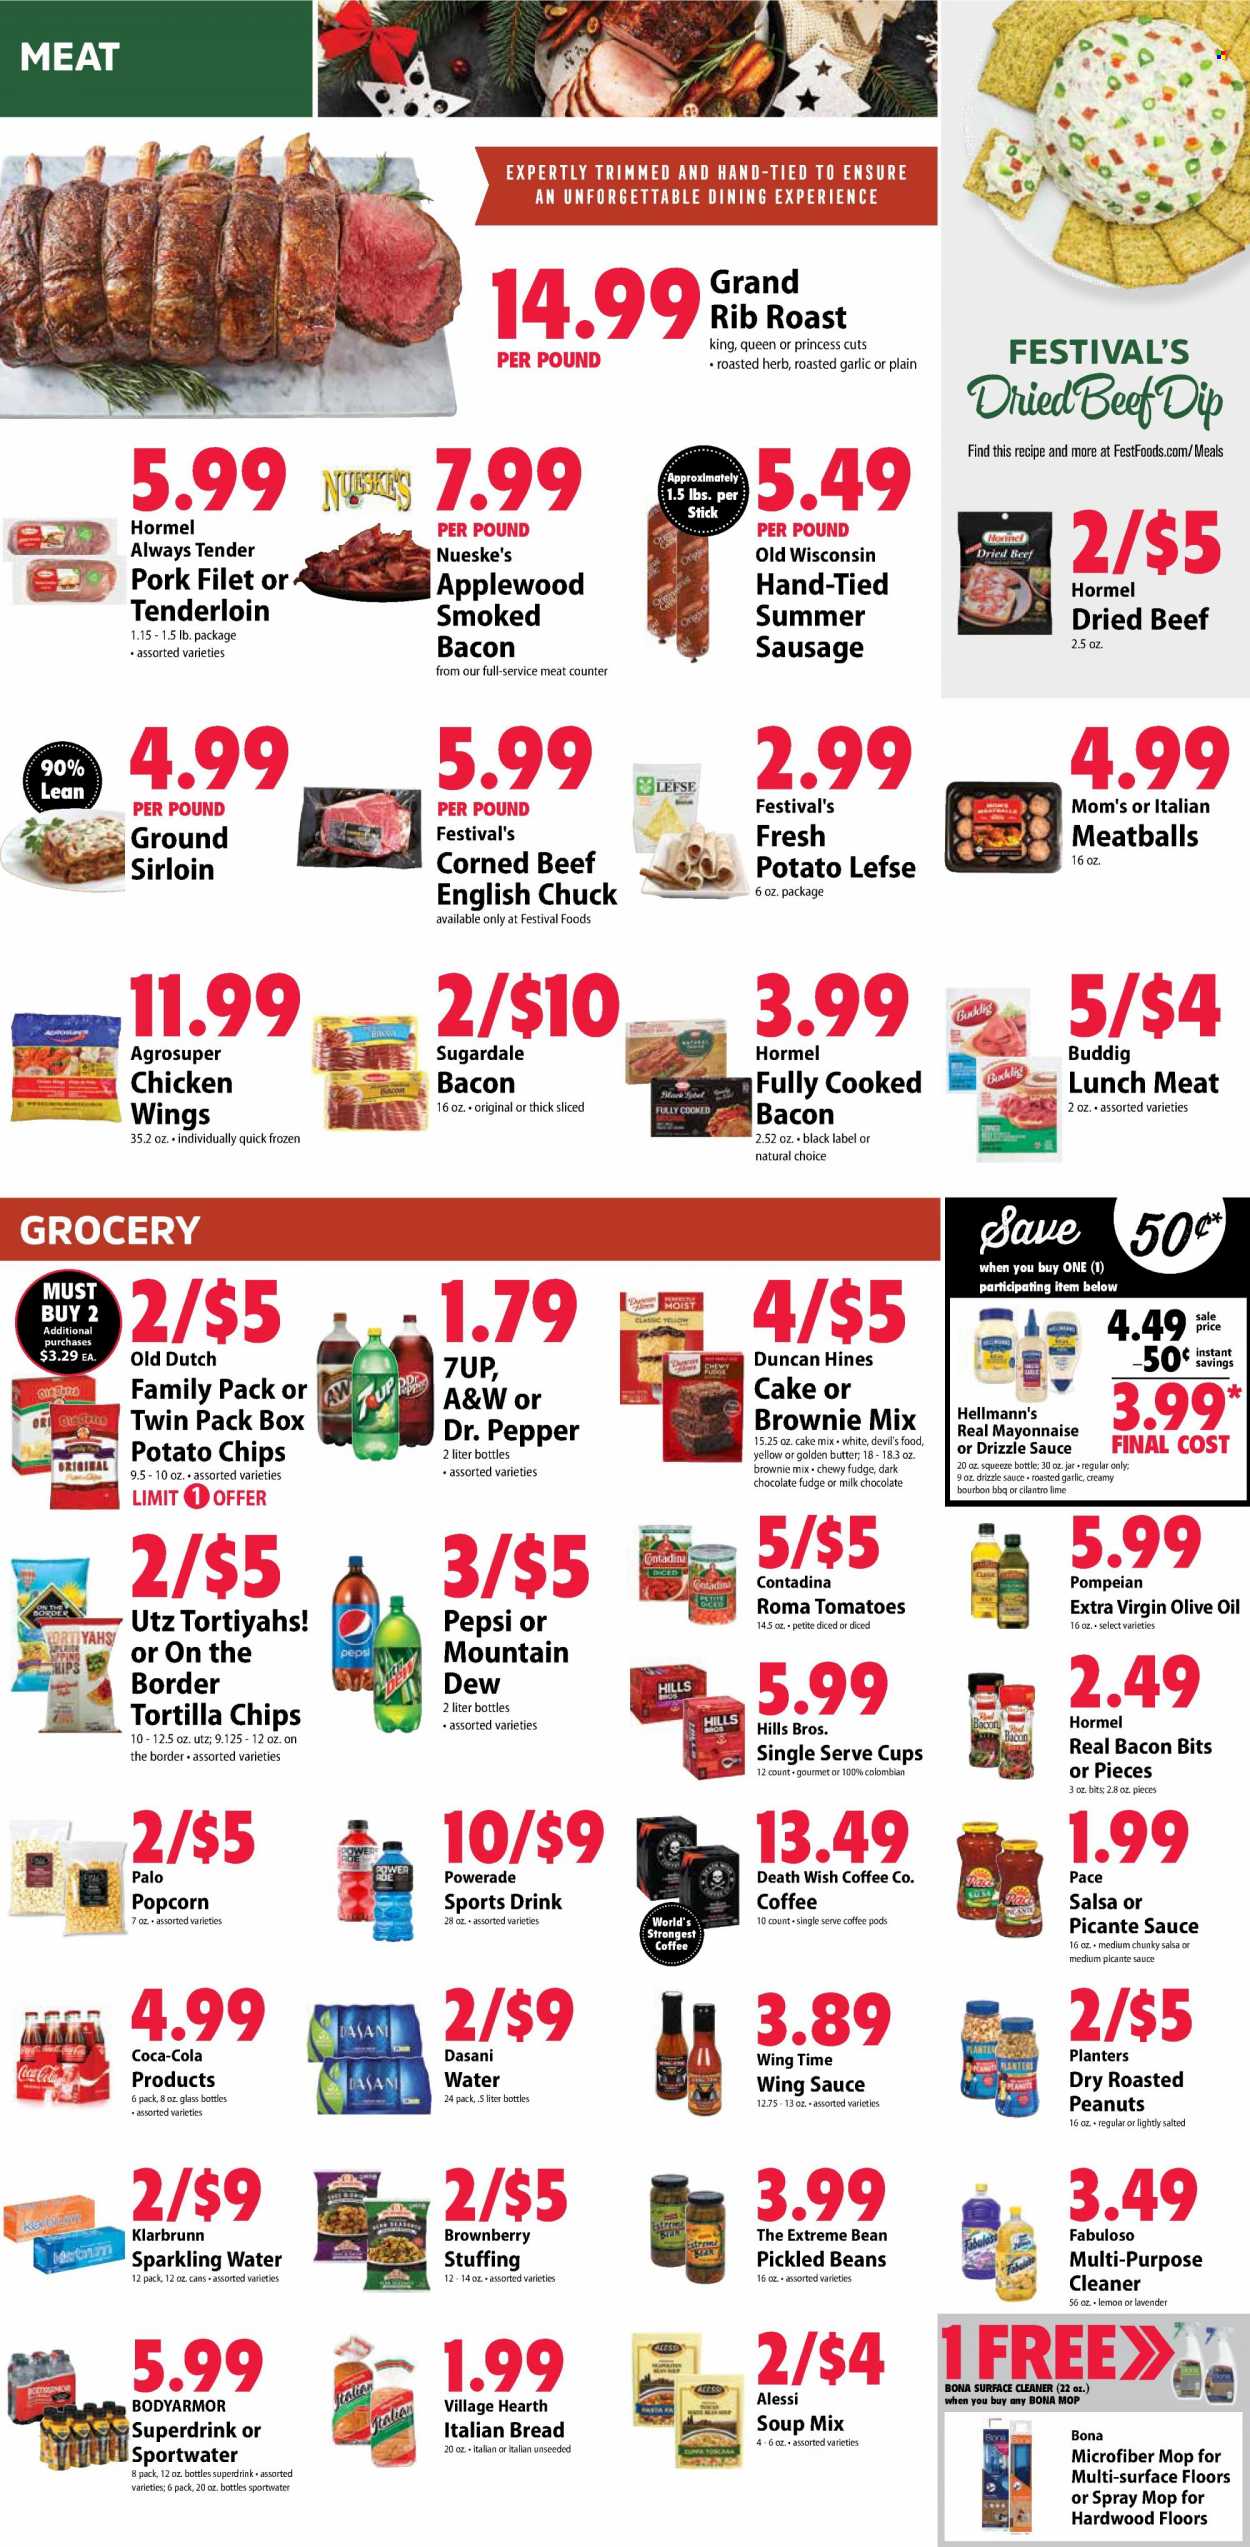 thumbnail - Festival Foods Flyer - 12/22/2021 - 12/28/2021 - Sales products - bread, brownie mix, cake mix, tomatoes, meatballs, soup mix, soup, pasta, sauce, Hormel, Sugardale, bacon bits, sausage, summer sausage, lunch meat, corned beef, butter, mayonnaise, Hellmann’s, fudge, milk chocolate, chocolate, dark chocolate, tortilla chips, potato chips, cilantro, salsa, wing sauce, extra virgin olive oil, olive oil, oil, roasted peanuts, peanuts, Planters, Coca-Cola, Mountain Dew, Powerade, Pepsi, Dr. Pepper, 7UP, A&W, sparkling water, coffee pods, Ron Pelicano, beef meat, grand rib roast, surface cleaner, cleaner, Fabuloso. Page 2.